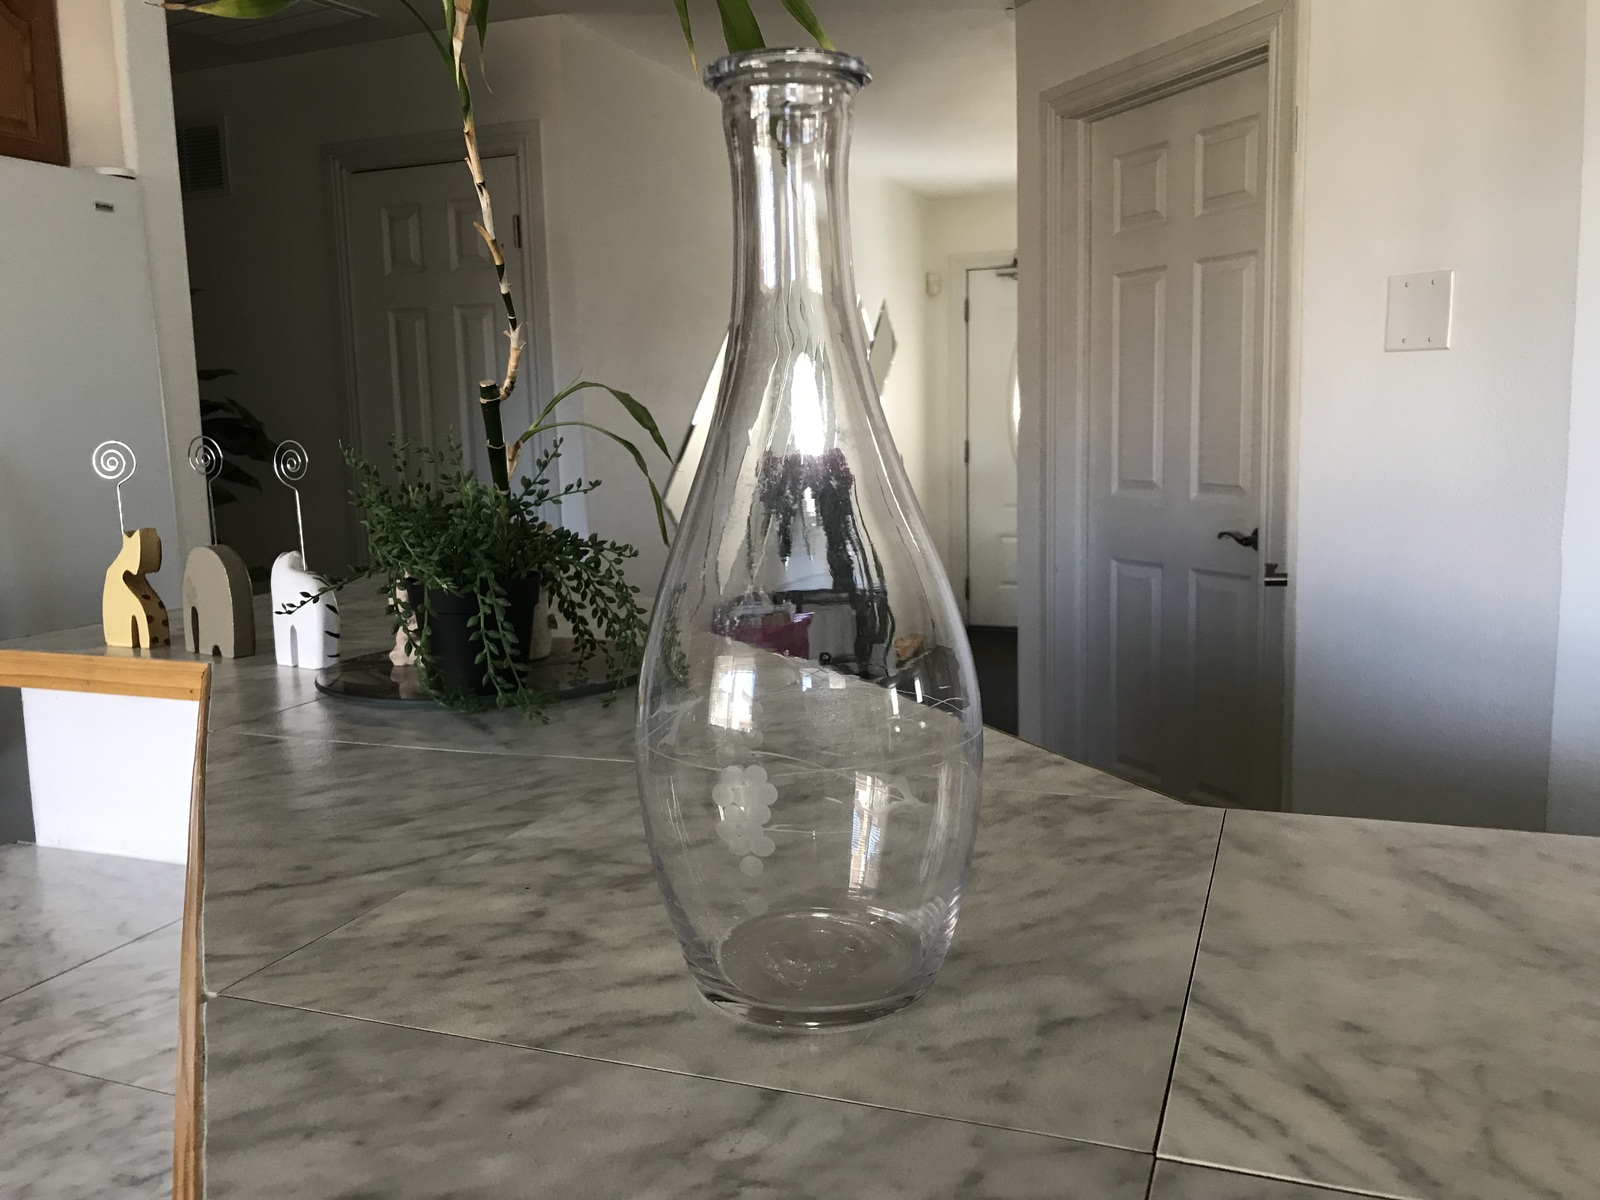  Princess House Heritage Cut Glass Carafe Decanter 11 3/4H (no stopper) - $19.99